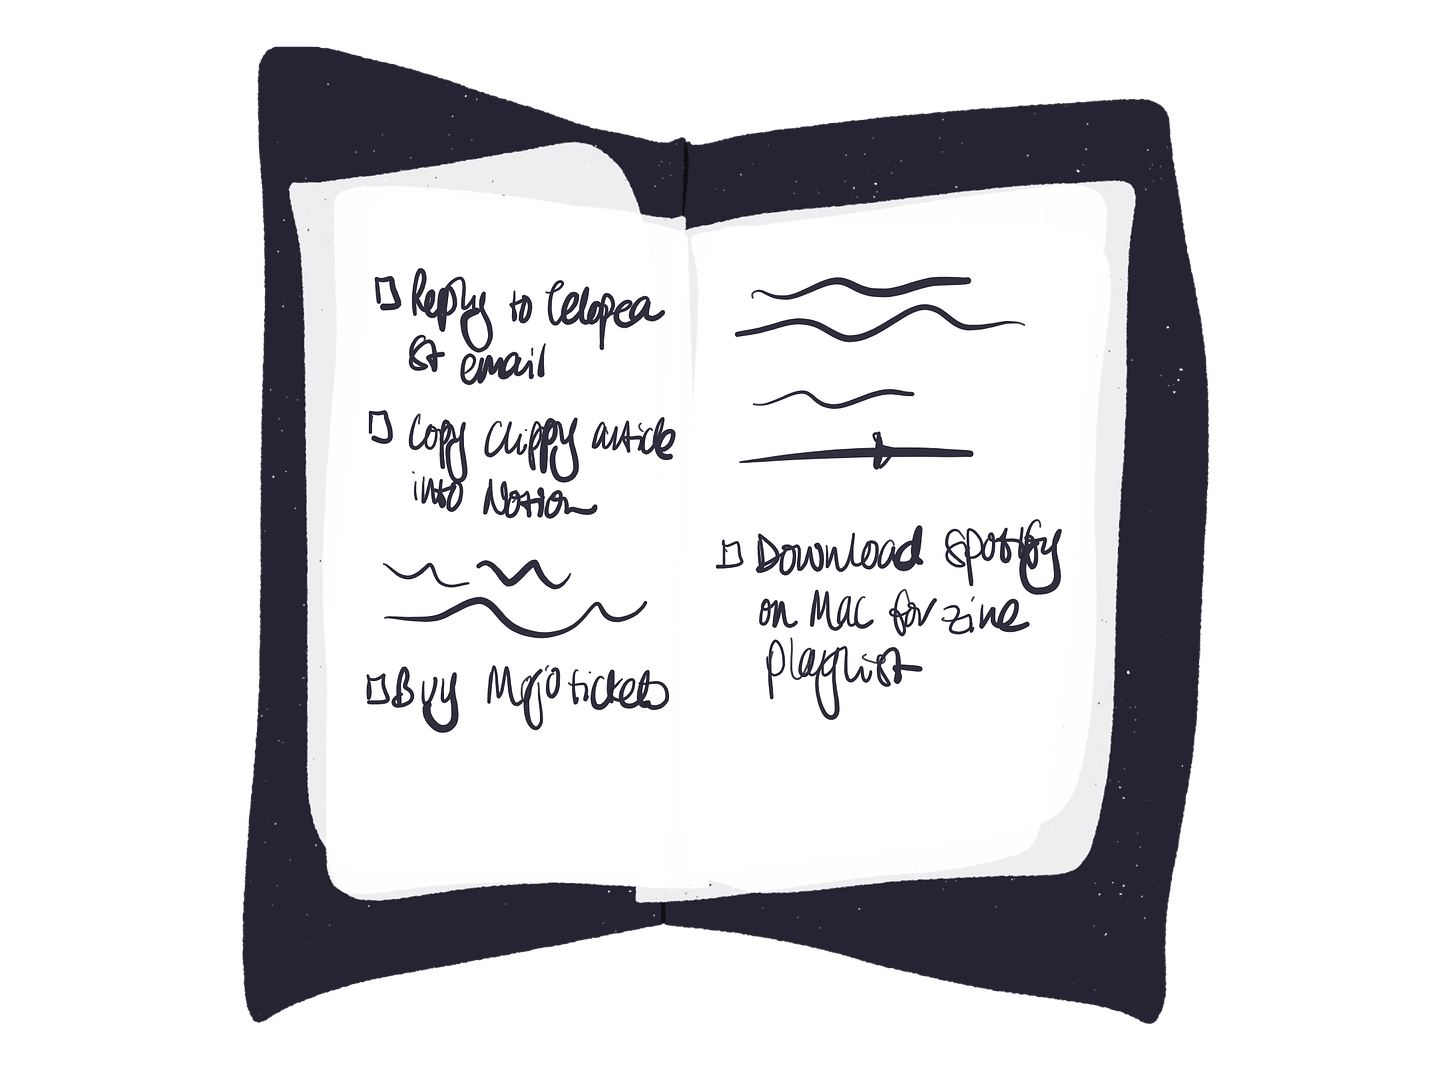 Drawing of a notebook, with tasks hand-written on it